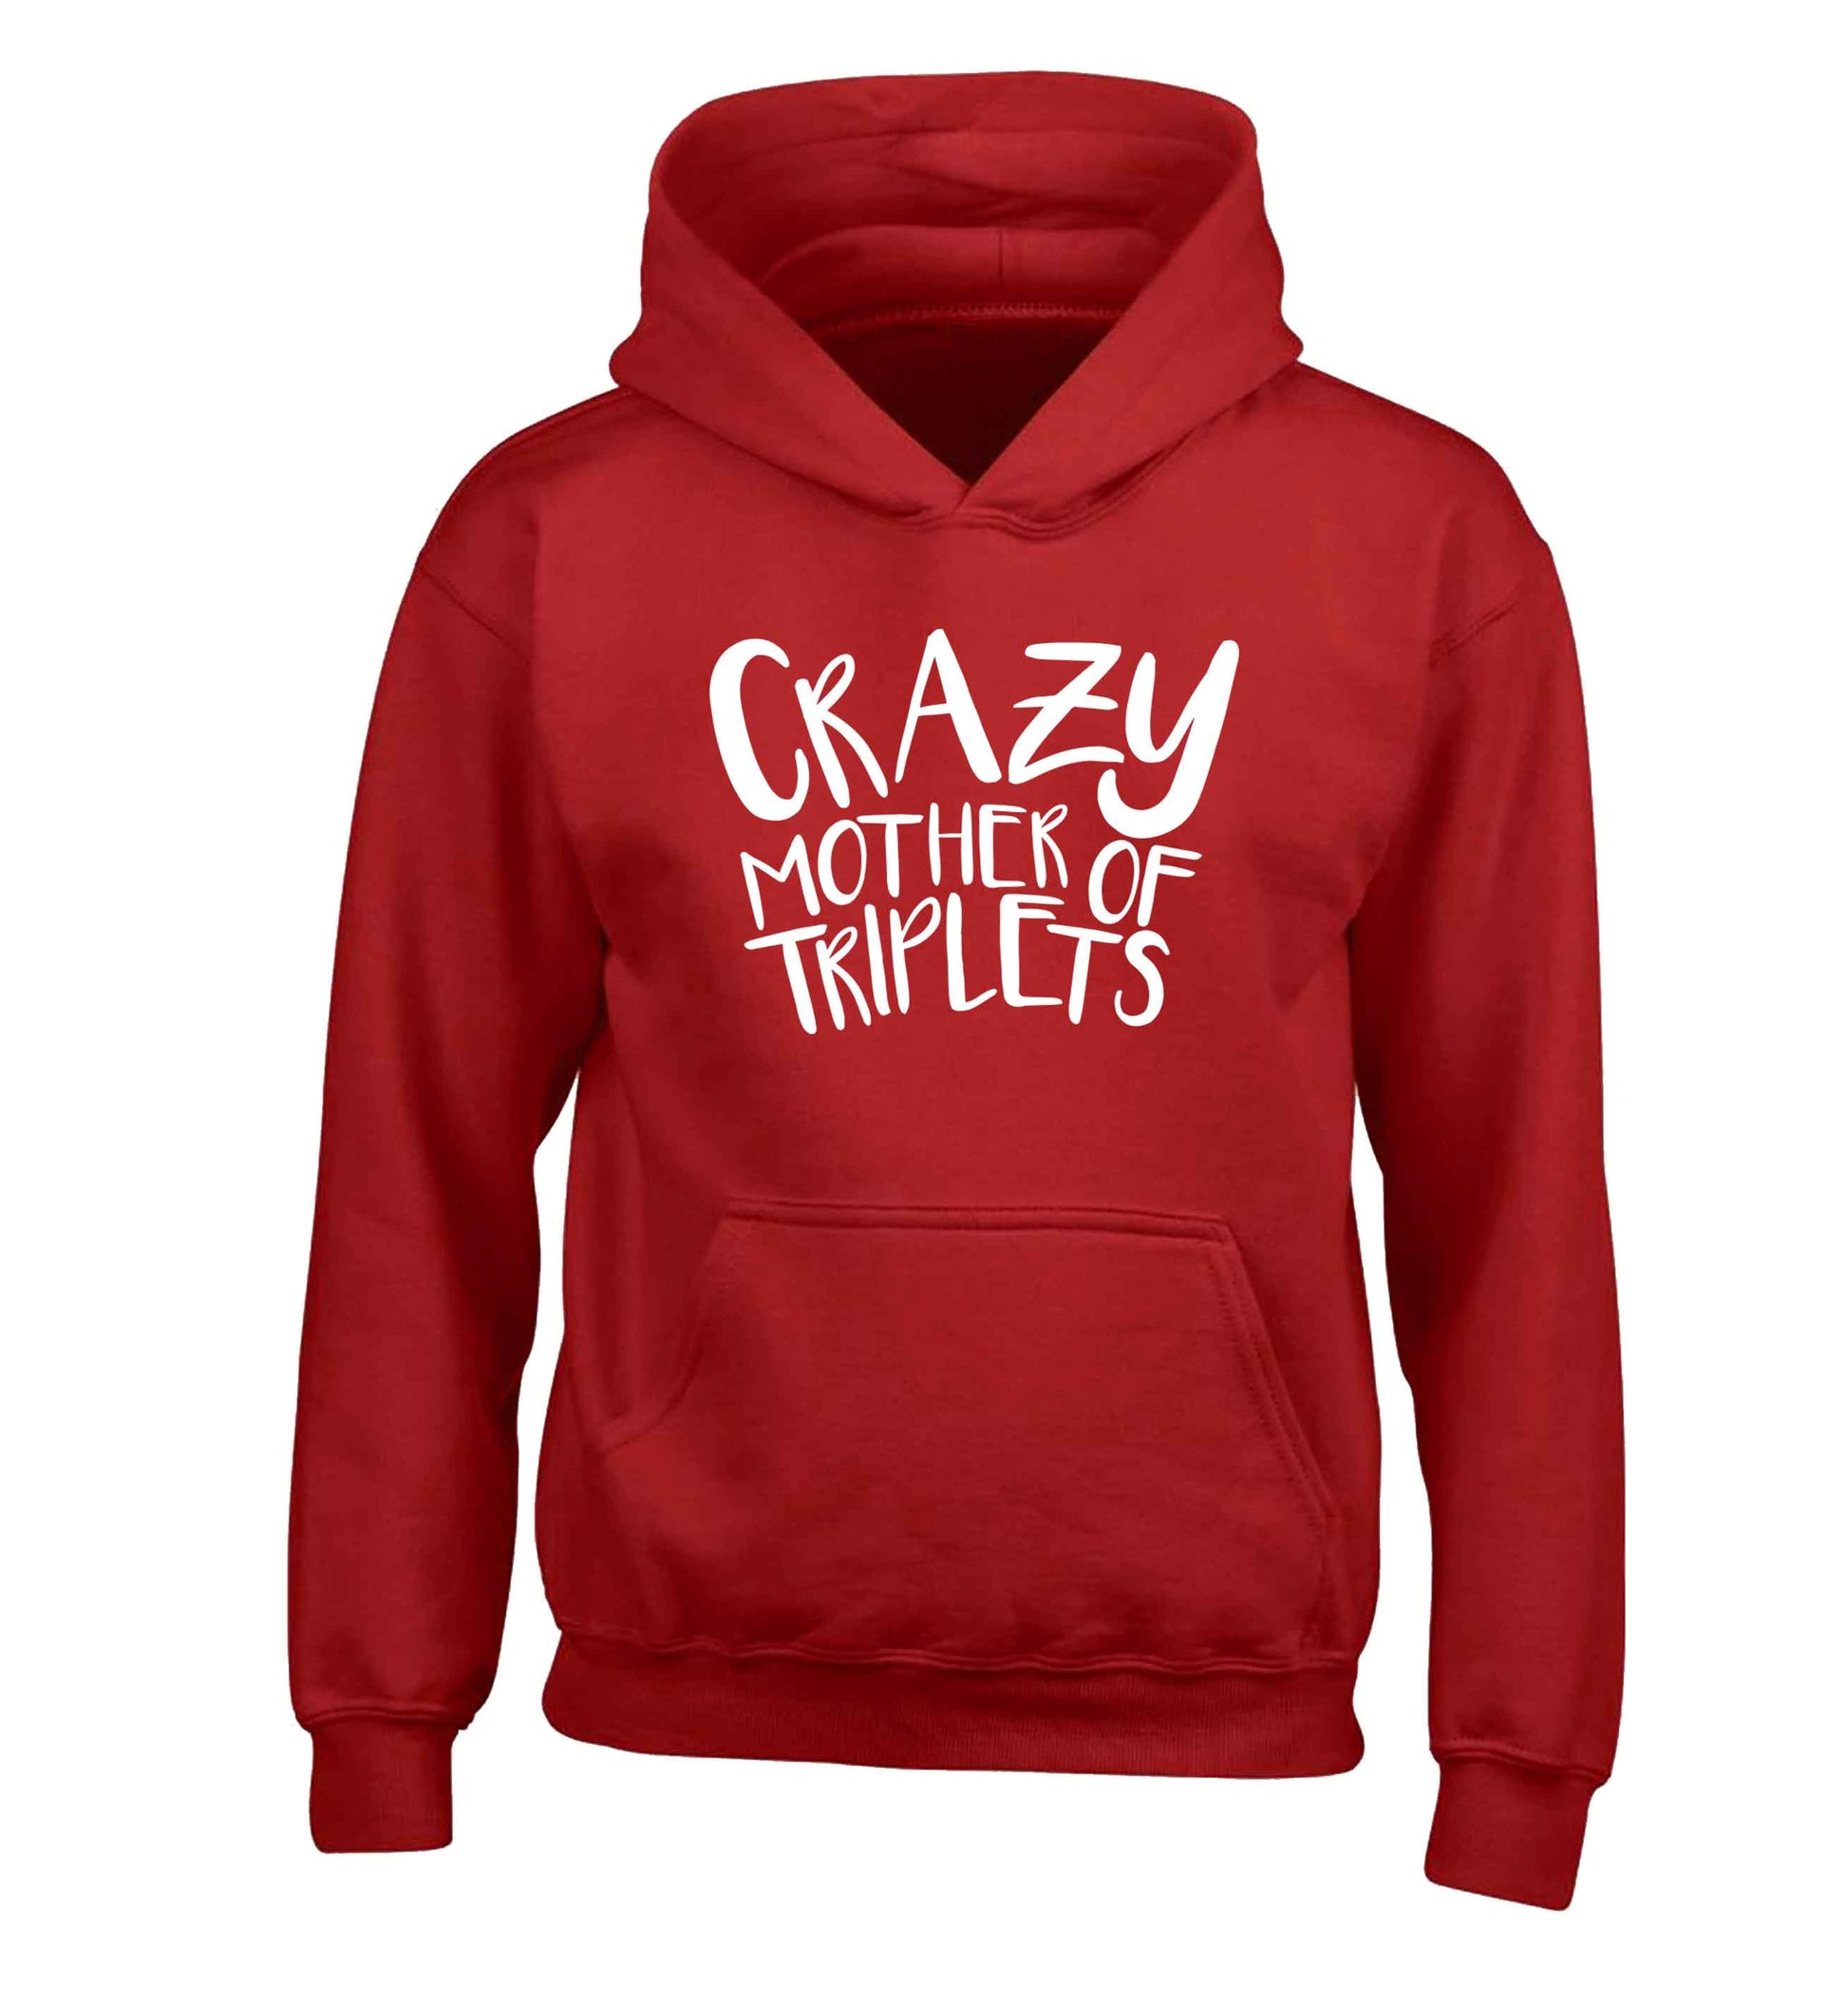 Crazy mother of triplets children's red hoodie 12-13 Years